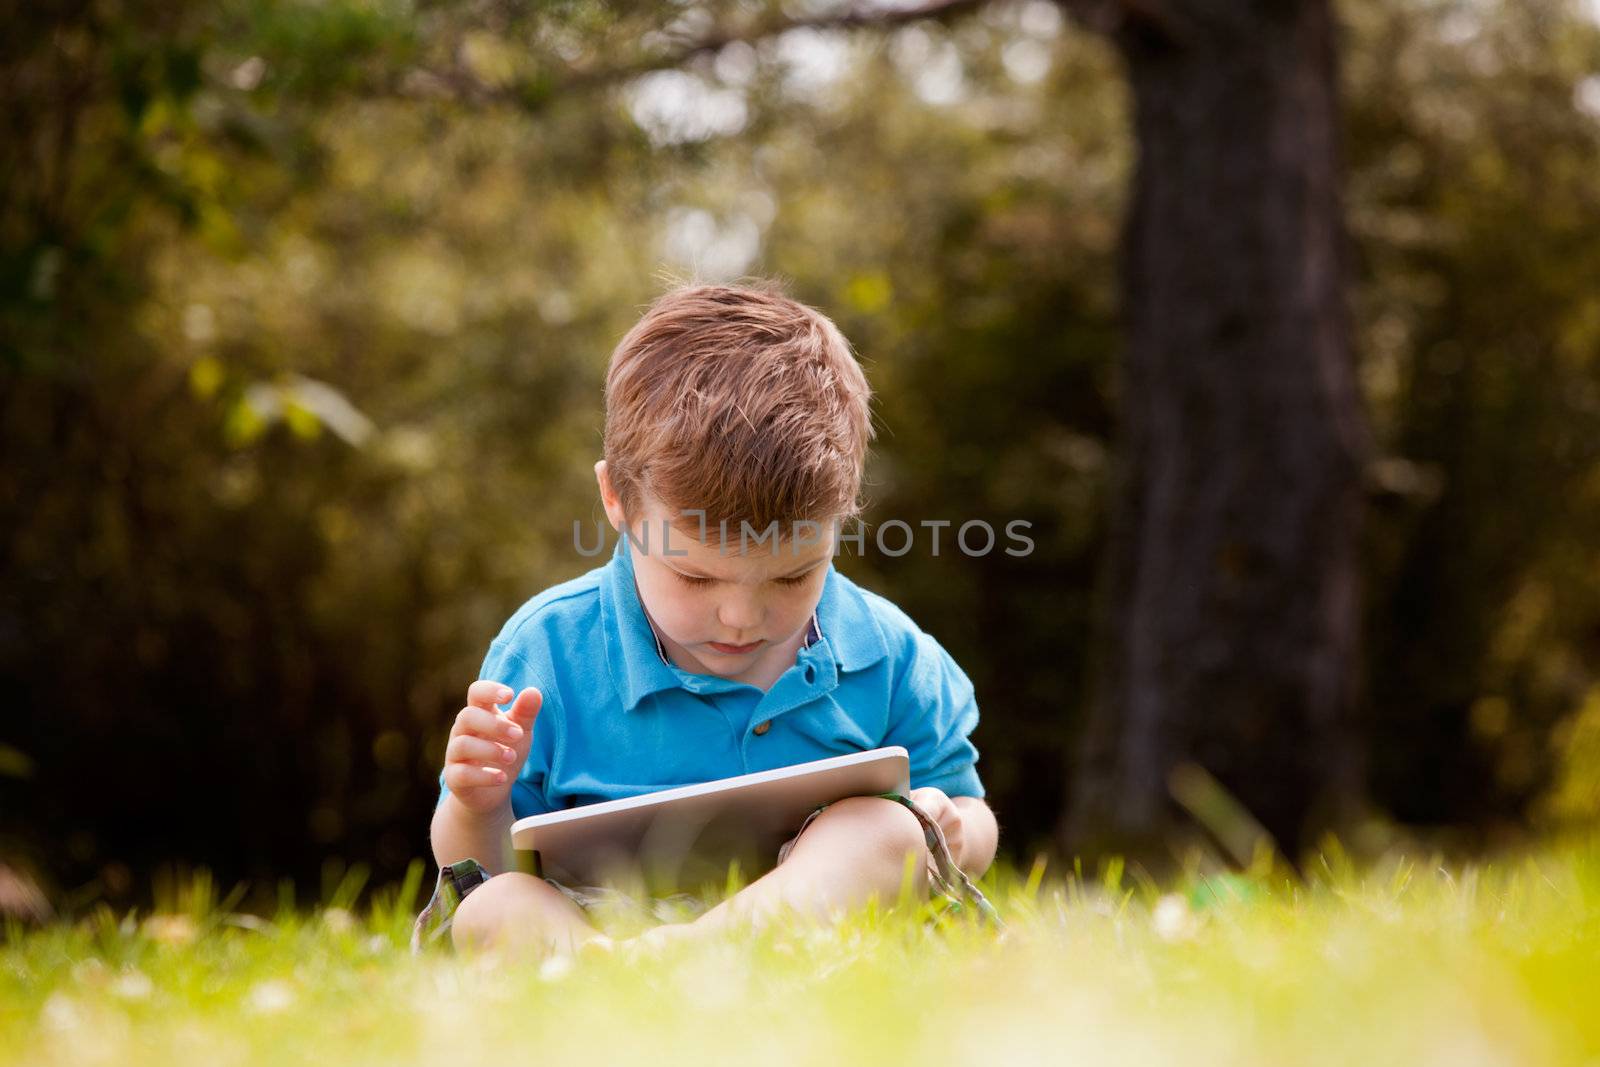 Cute young boy playing with a digital tablet outdoors in park